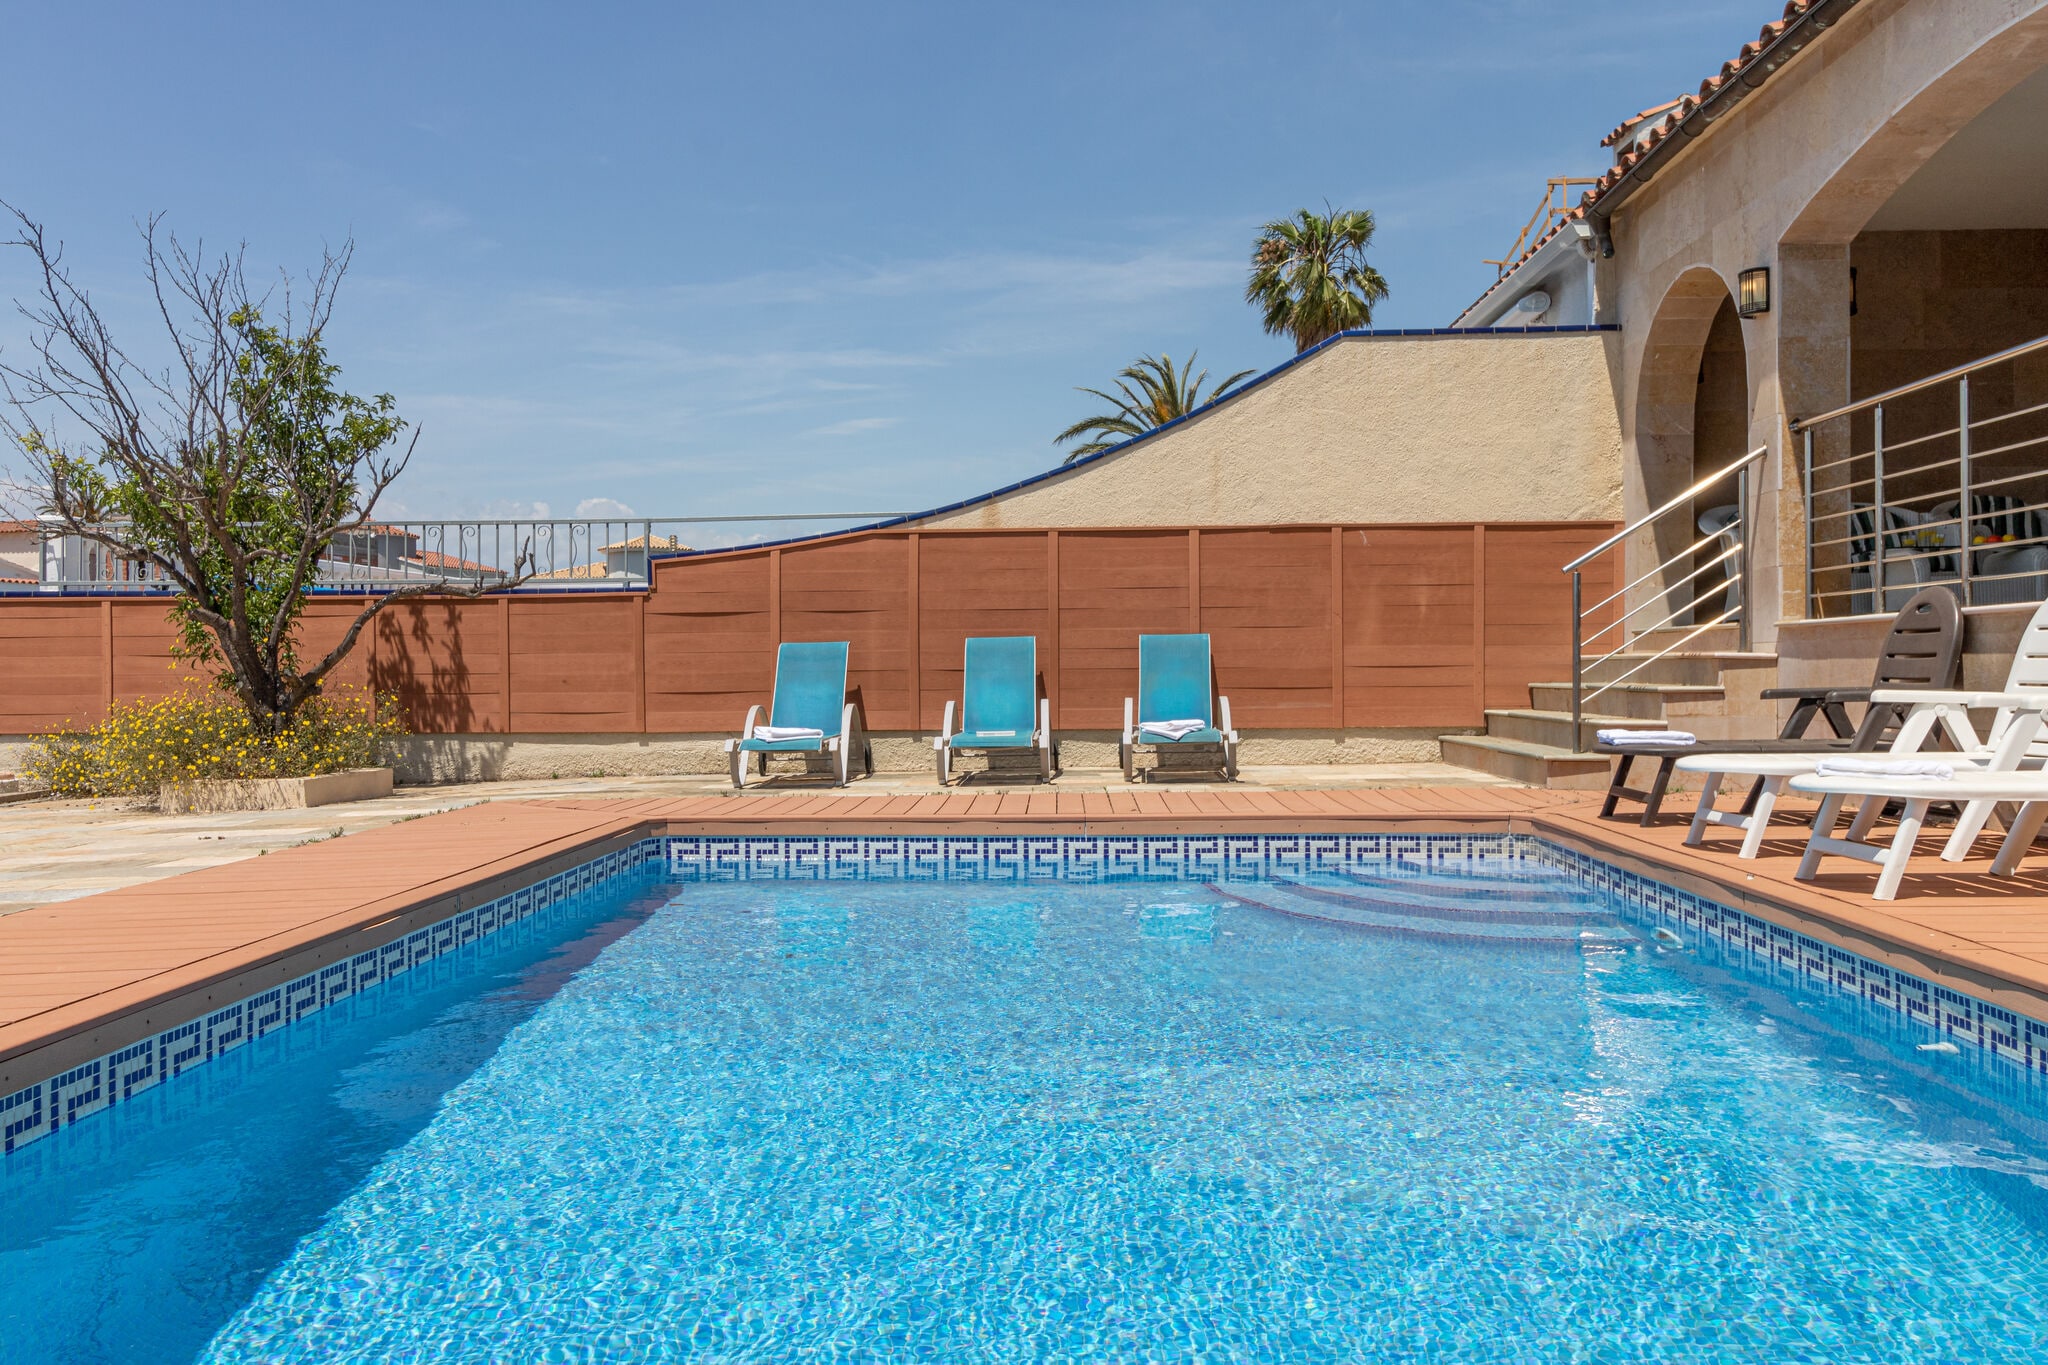 4 bedroom villa with pool in the channel of Empuriabrava